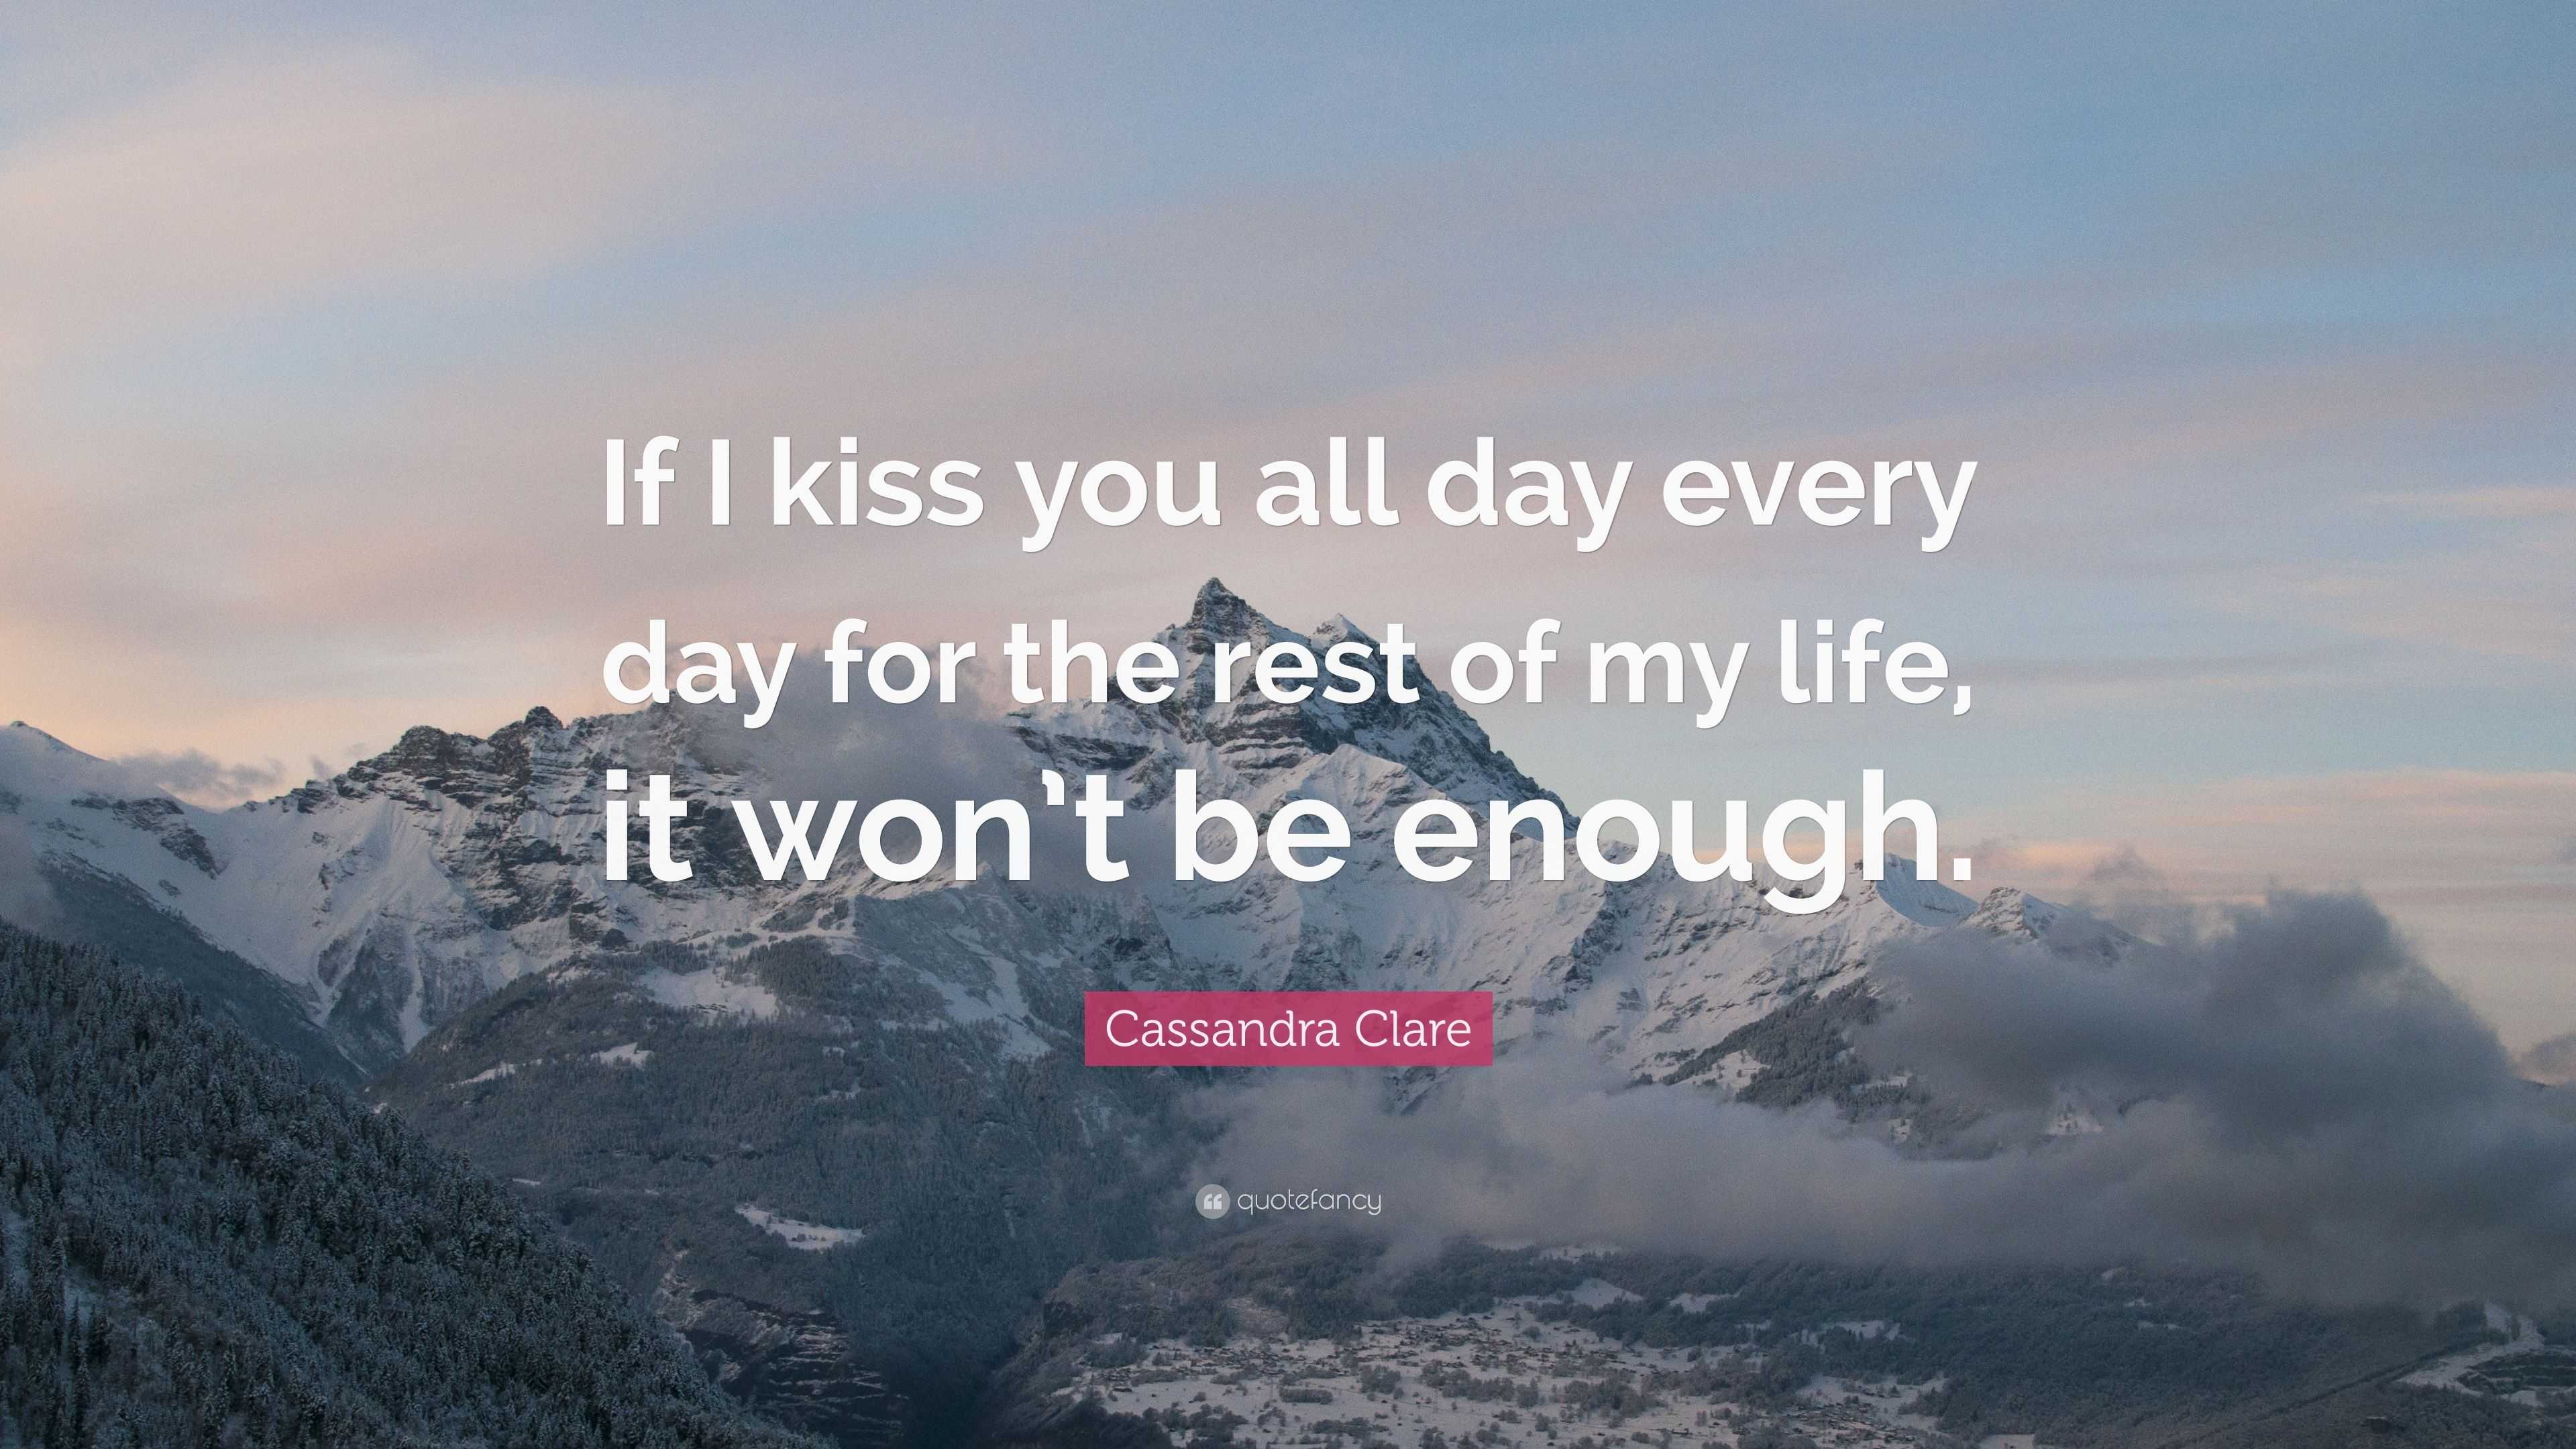 Cassandra Clare Quote: “If I kiss you all day every day for the rest of ...